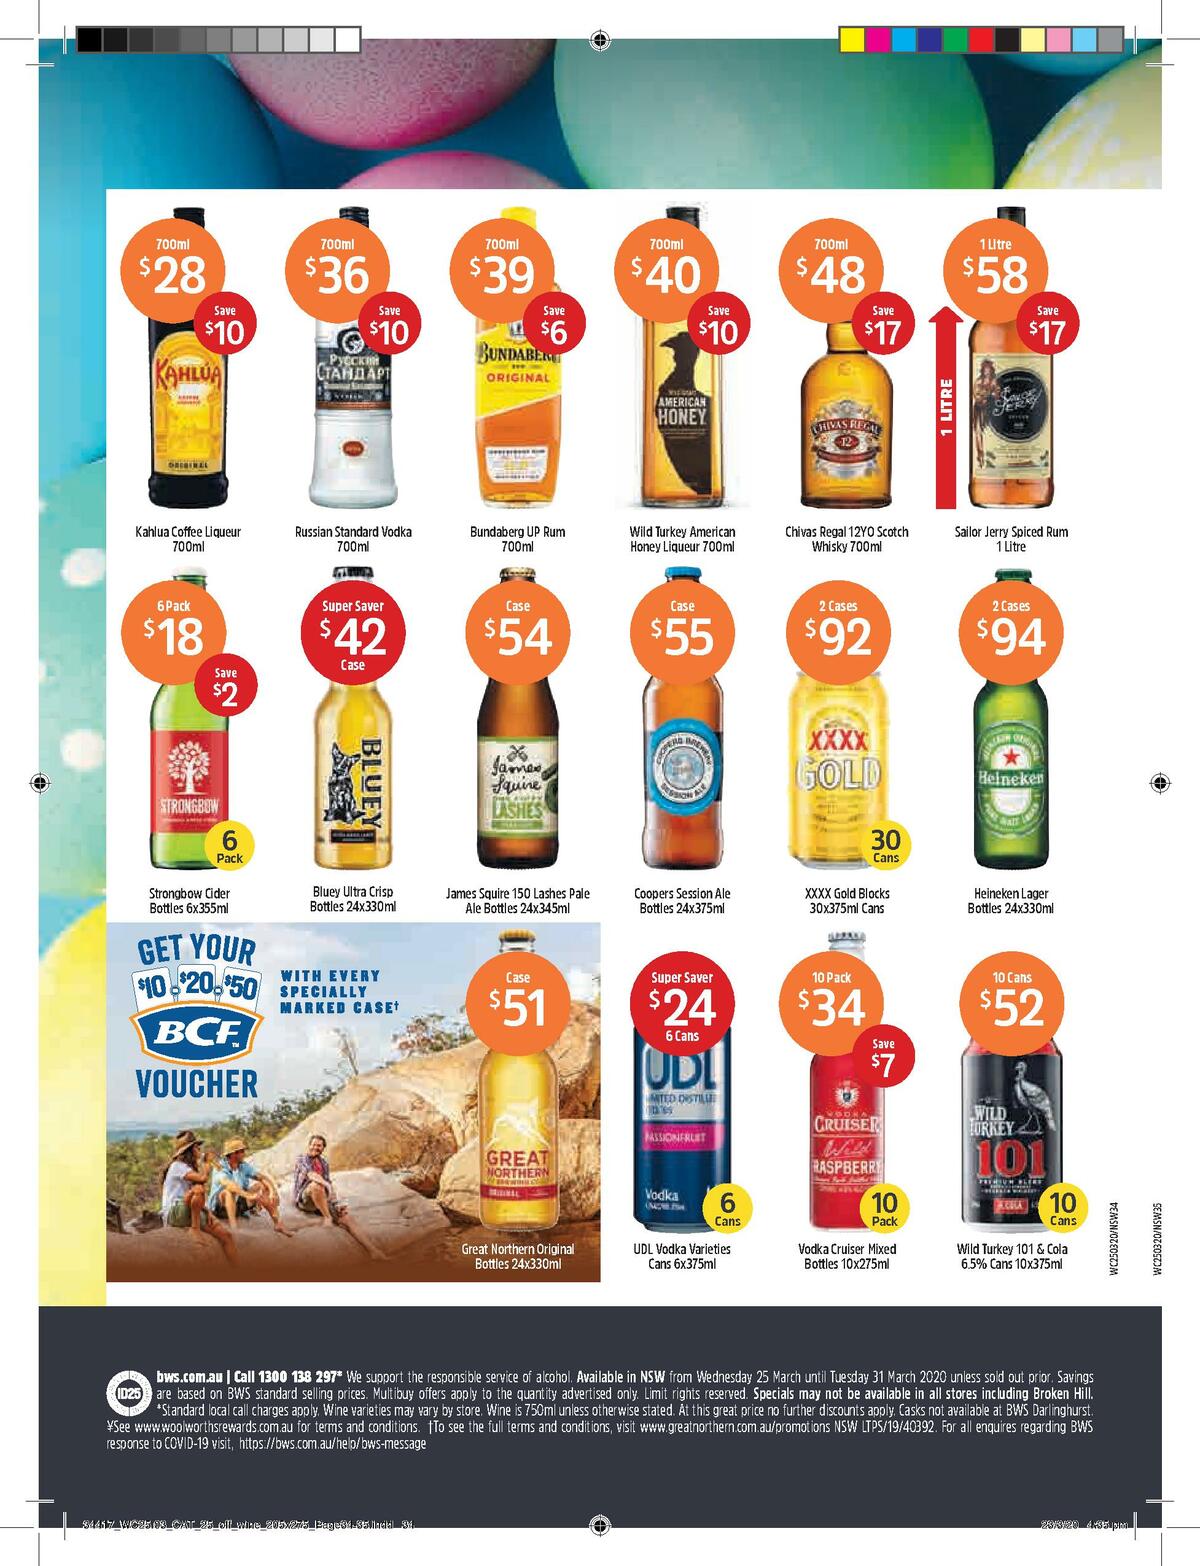 Woolworths Catalogues from 25 March